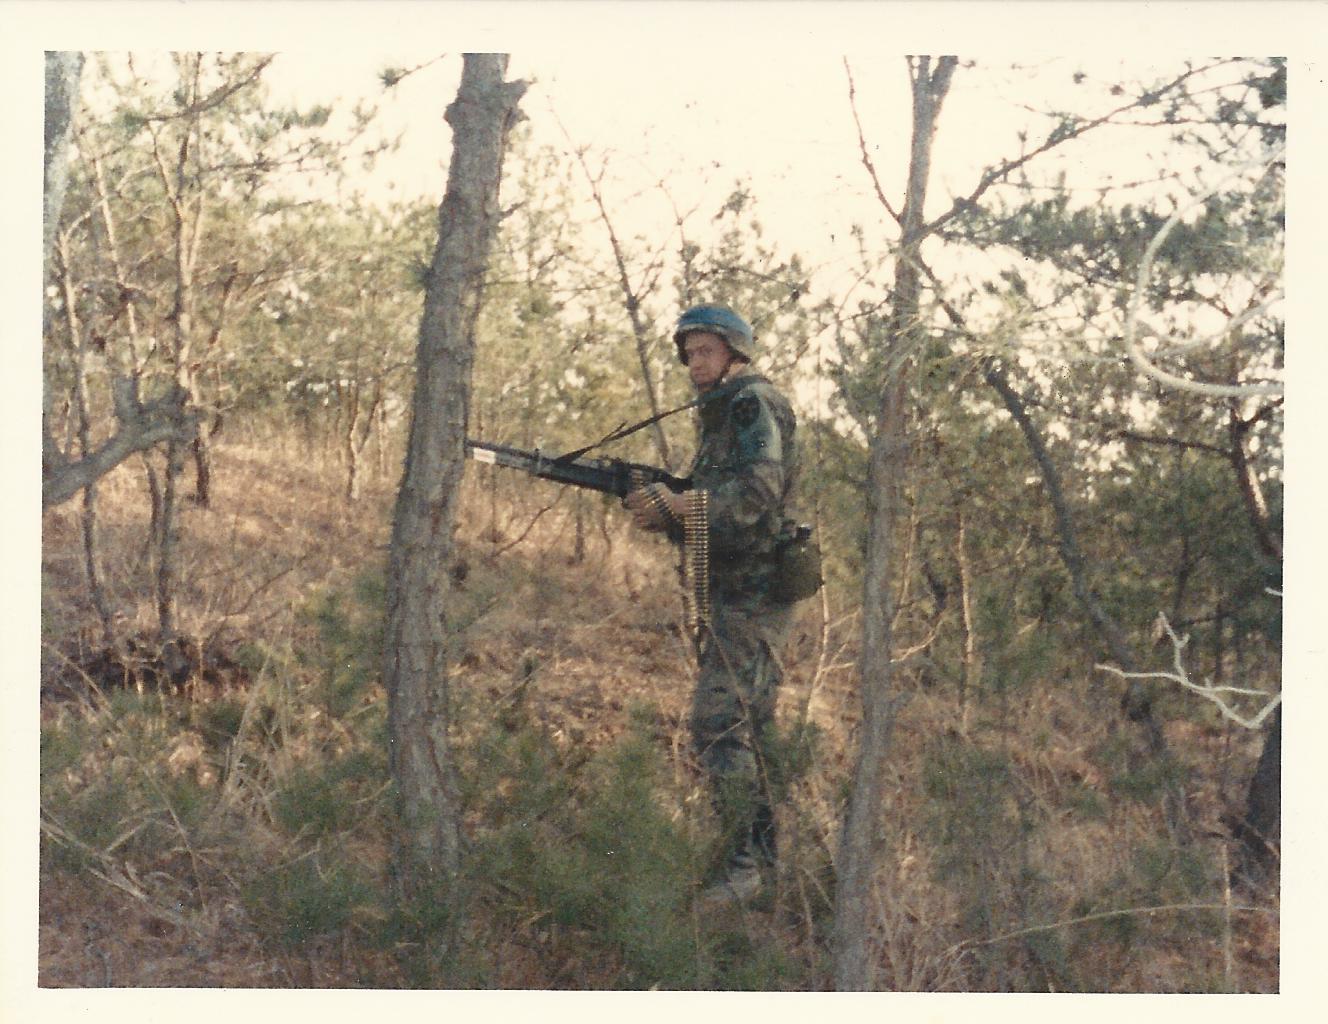 Michael during field training exercise at Fort A.P. Hill.